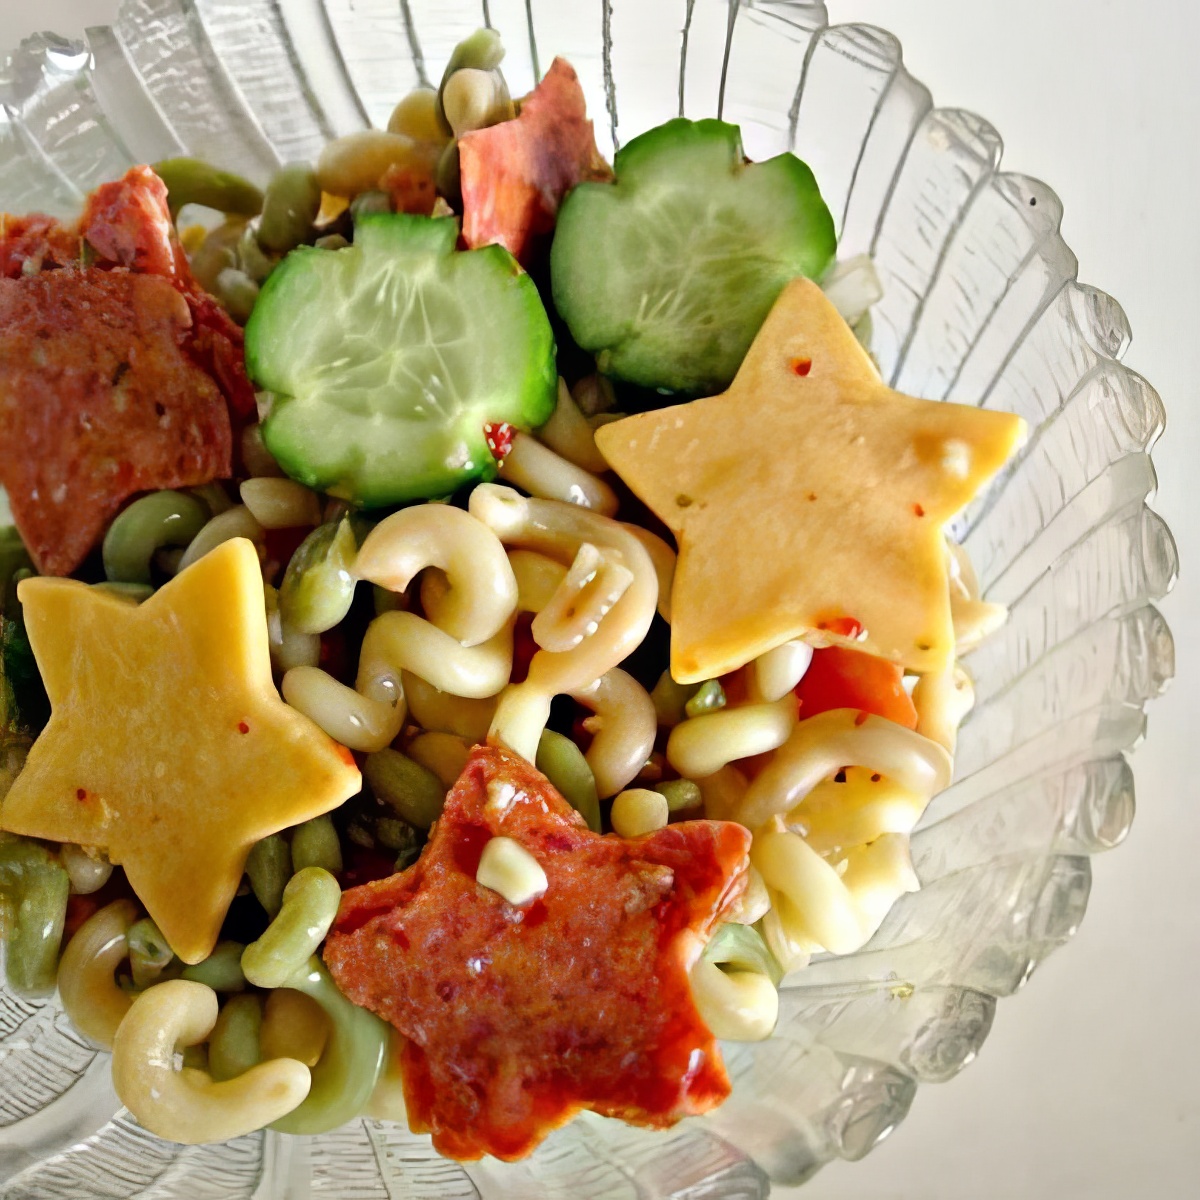 Love these creative idea of adding colors and shapes to your favorite yummy pasta salad at home with your kids!